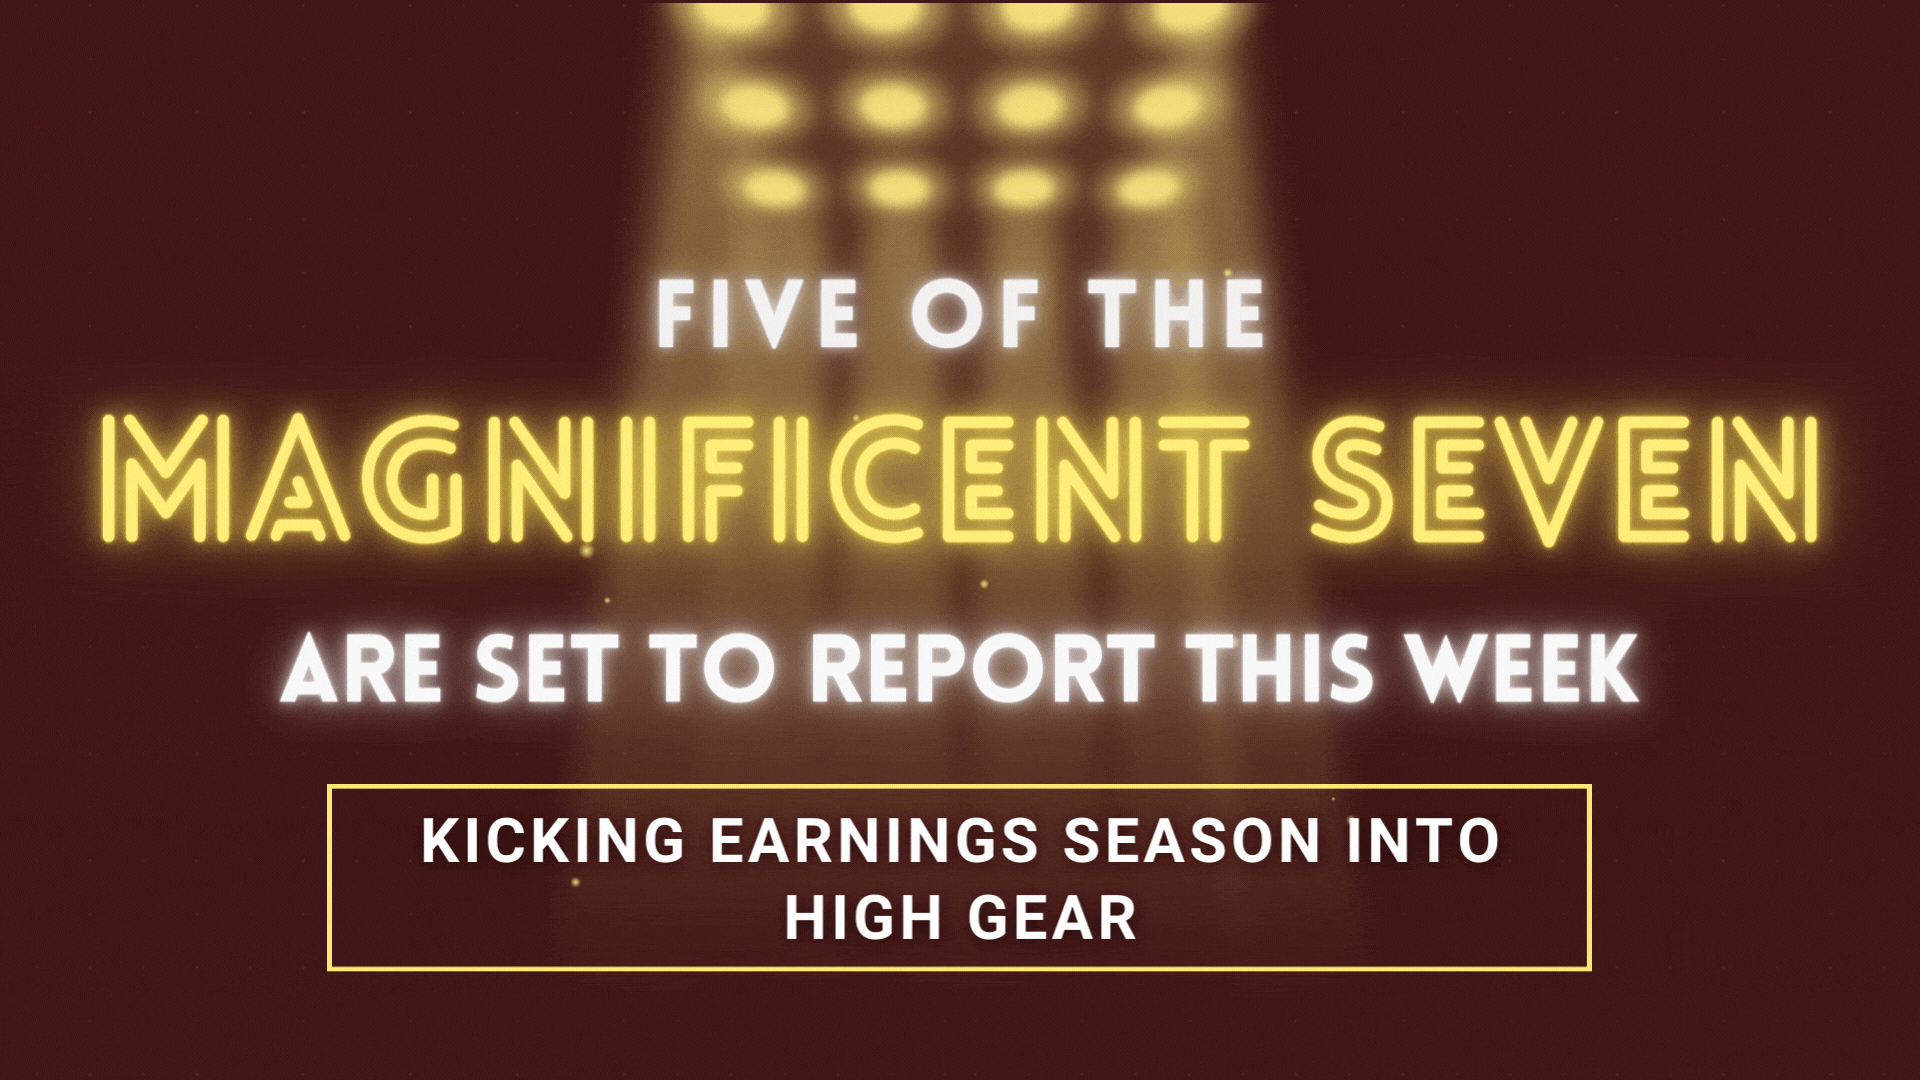 Earnings Season Kicks into High Gear with Magnificent 7 Reports